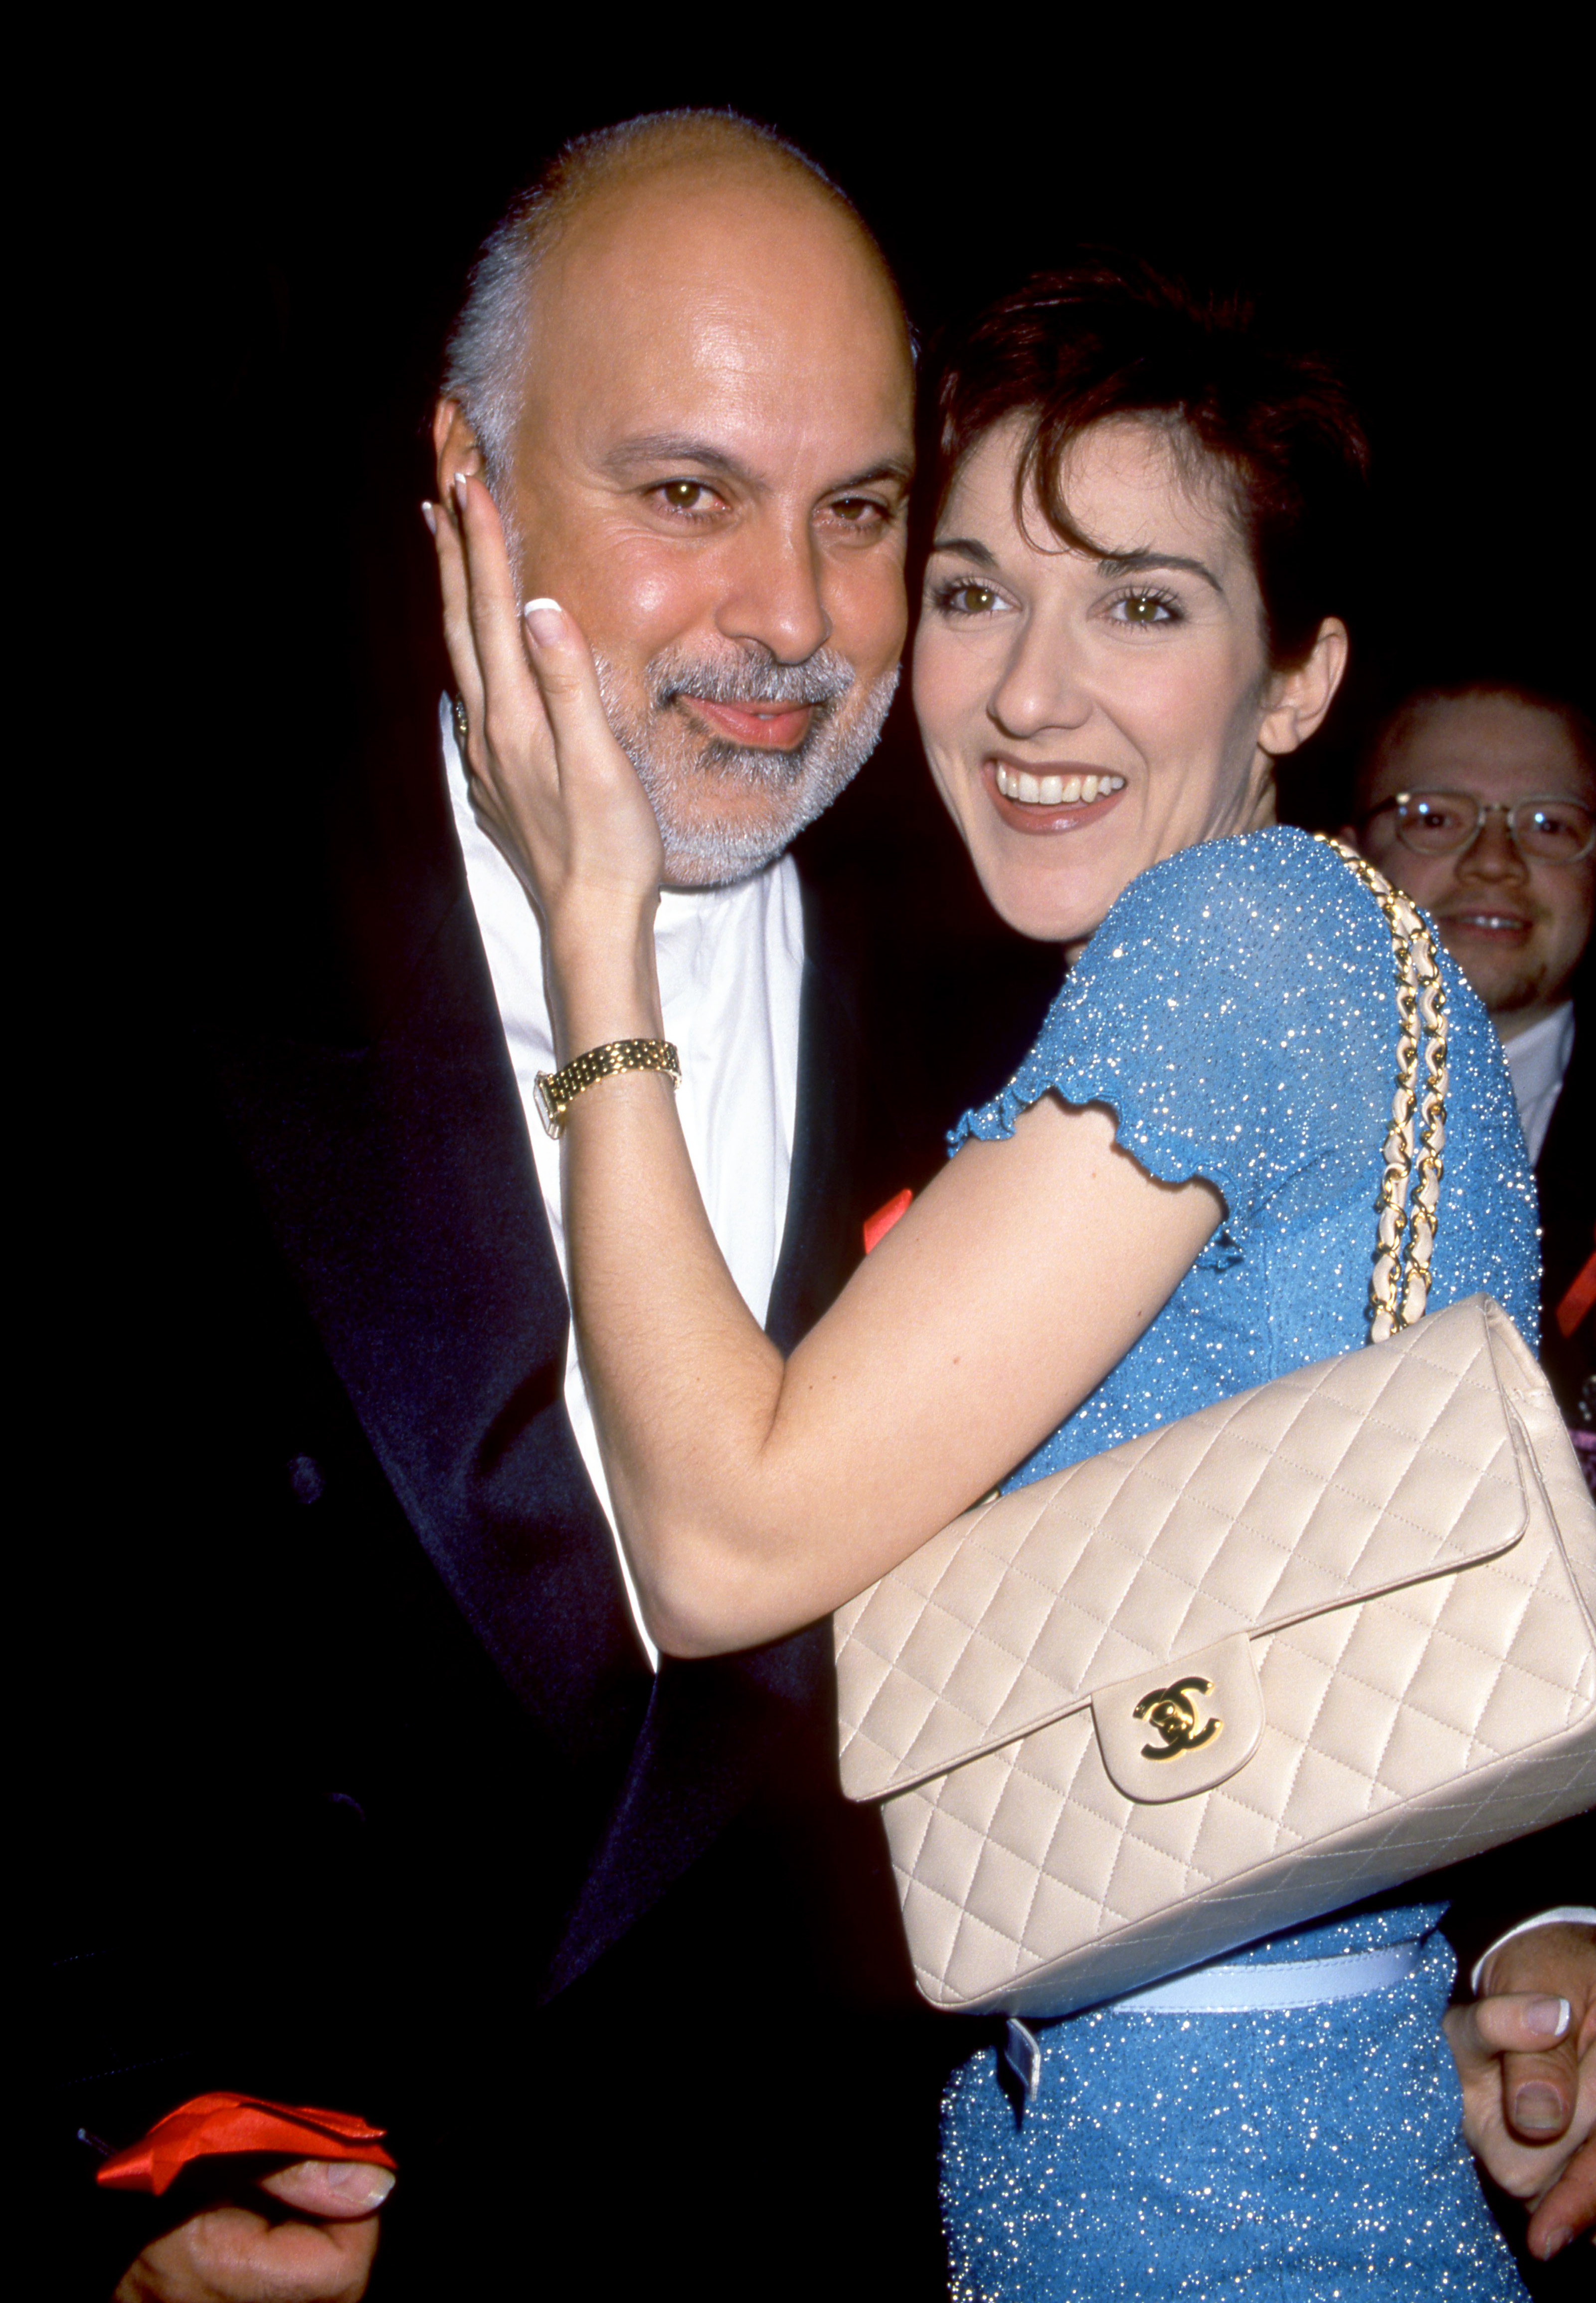 Celine Dion and Rene Angelil during The 22nd Annual American Music Awards at the Shrine Auditorium on January 30, 1995 in Los Angeles, California. | Source: Getty Images